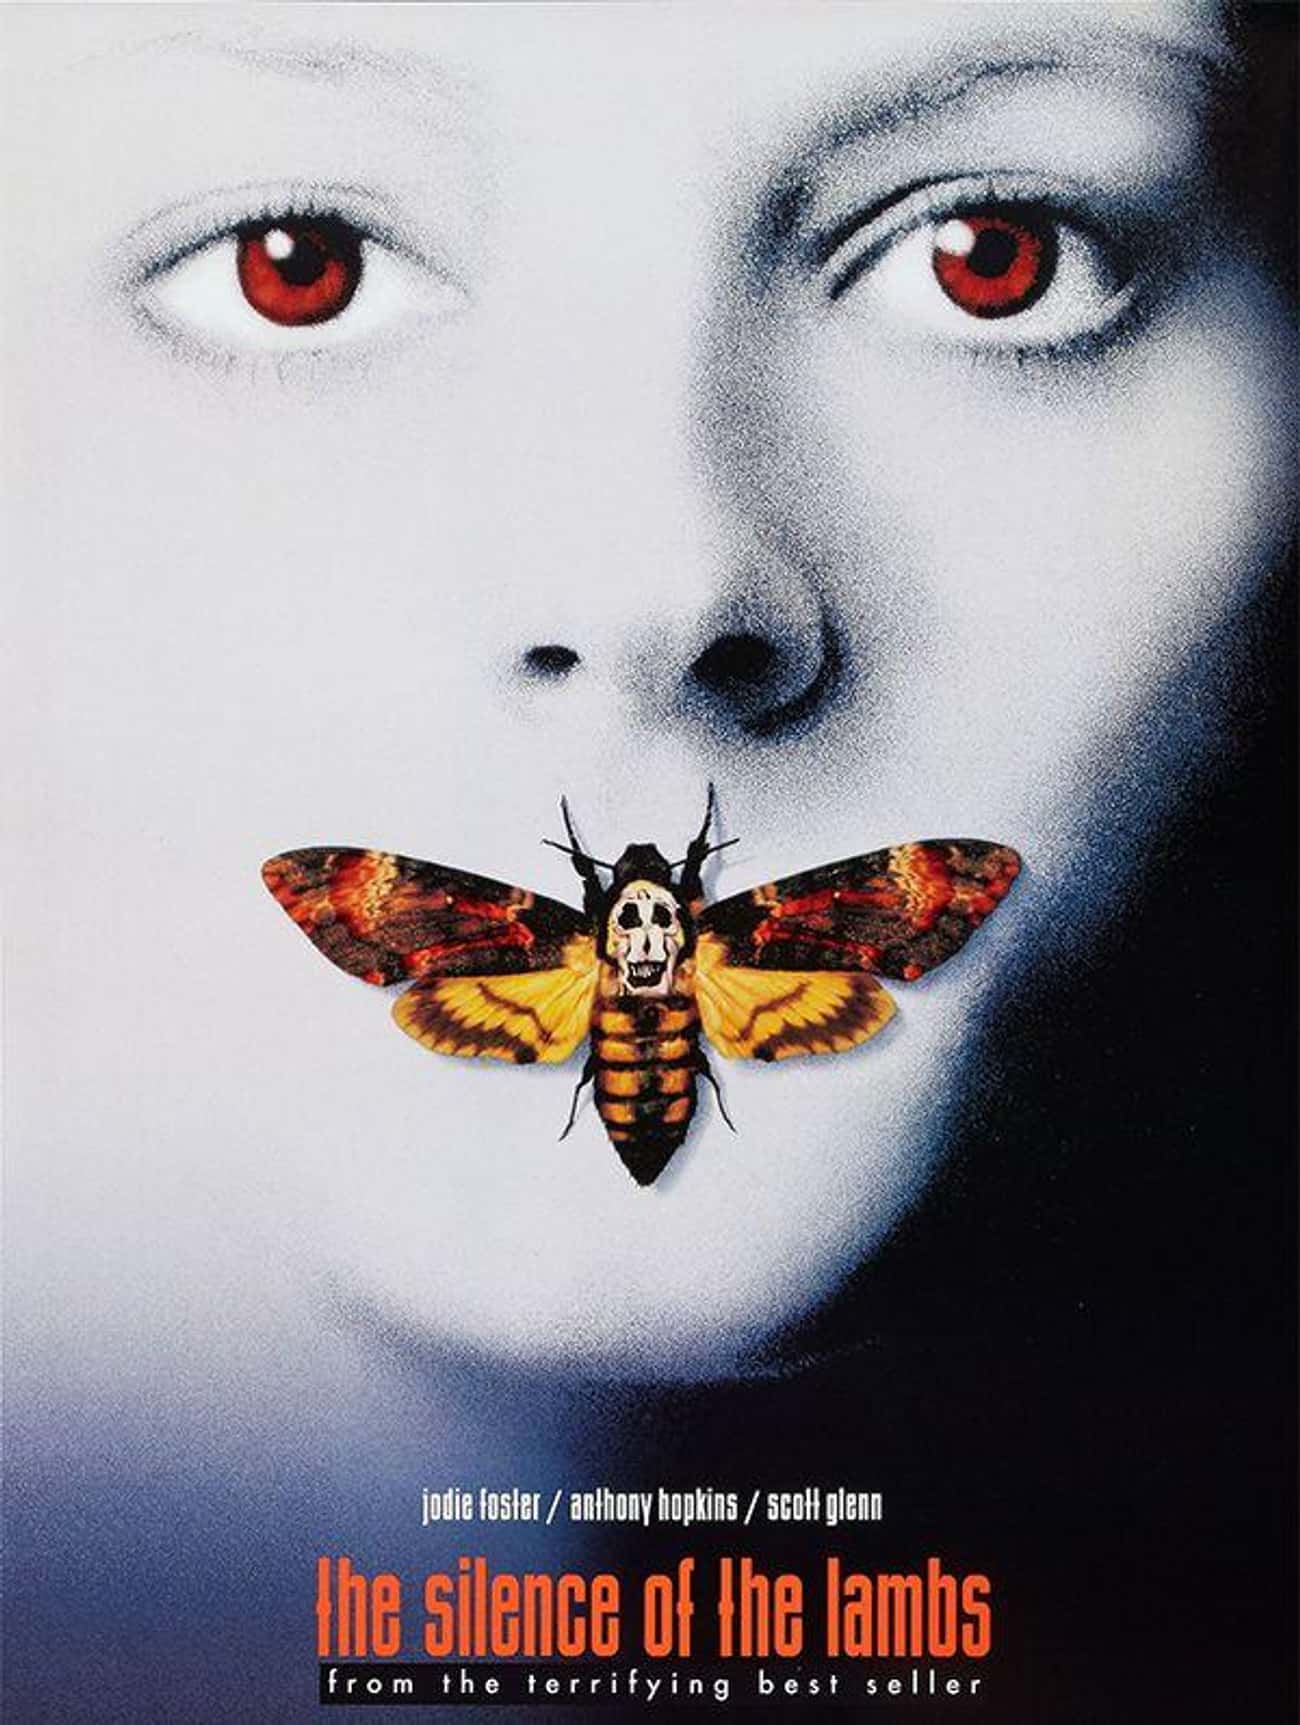 'The Silence of the Lambs' Uses Hidden Images